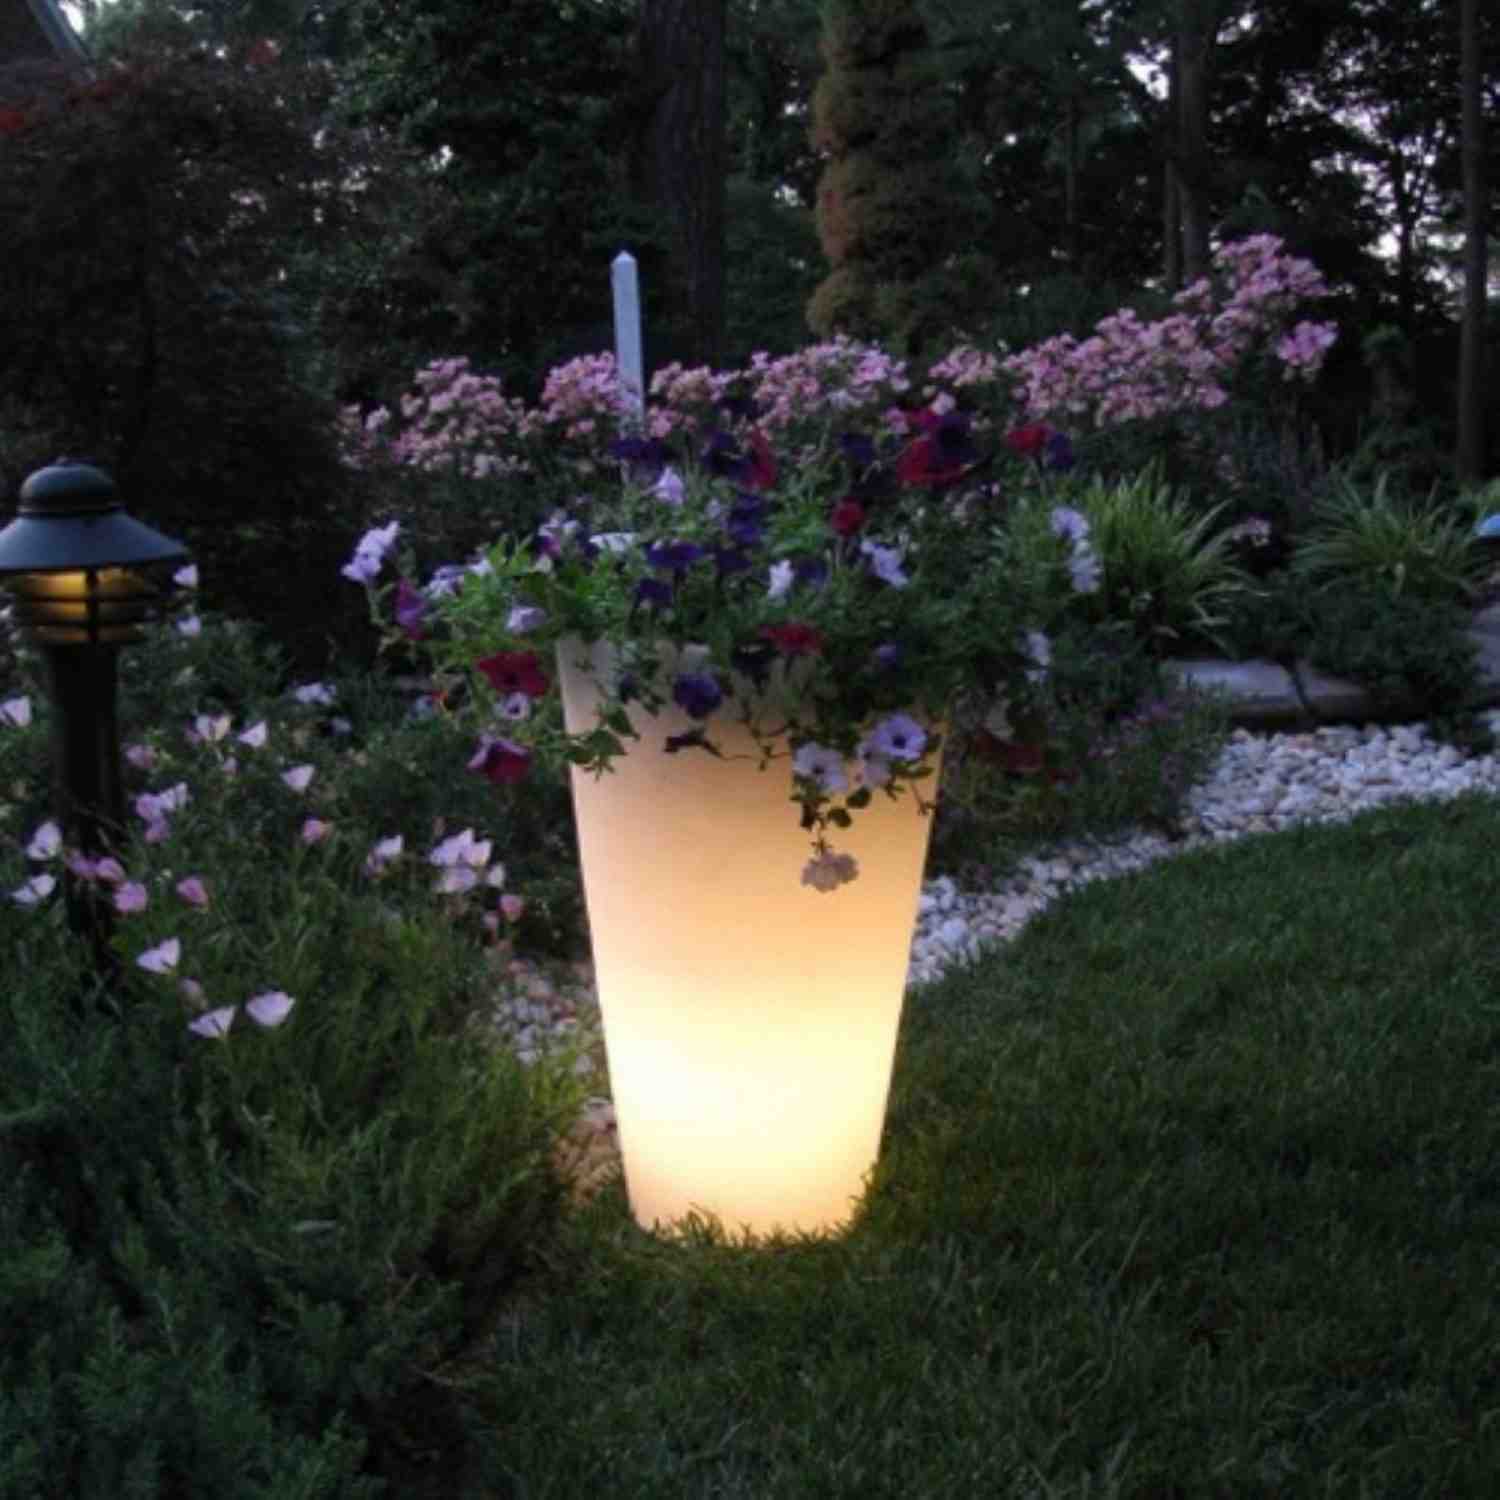 How to Make a Glowing Flower